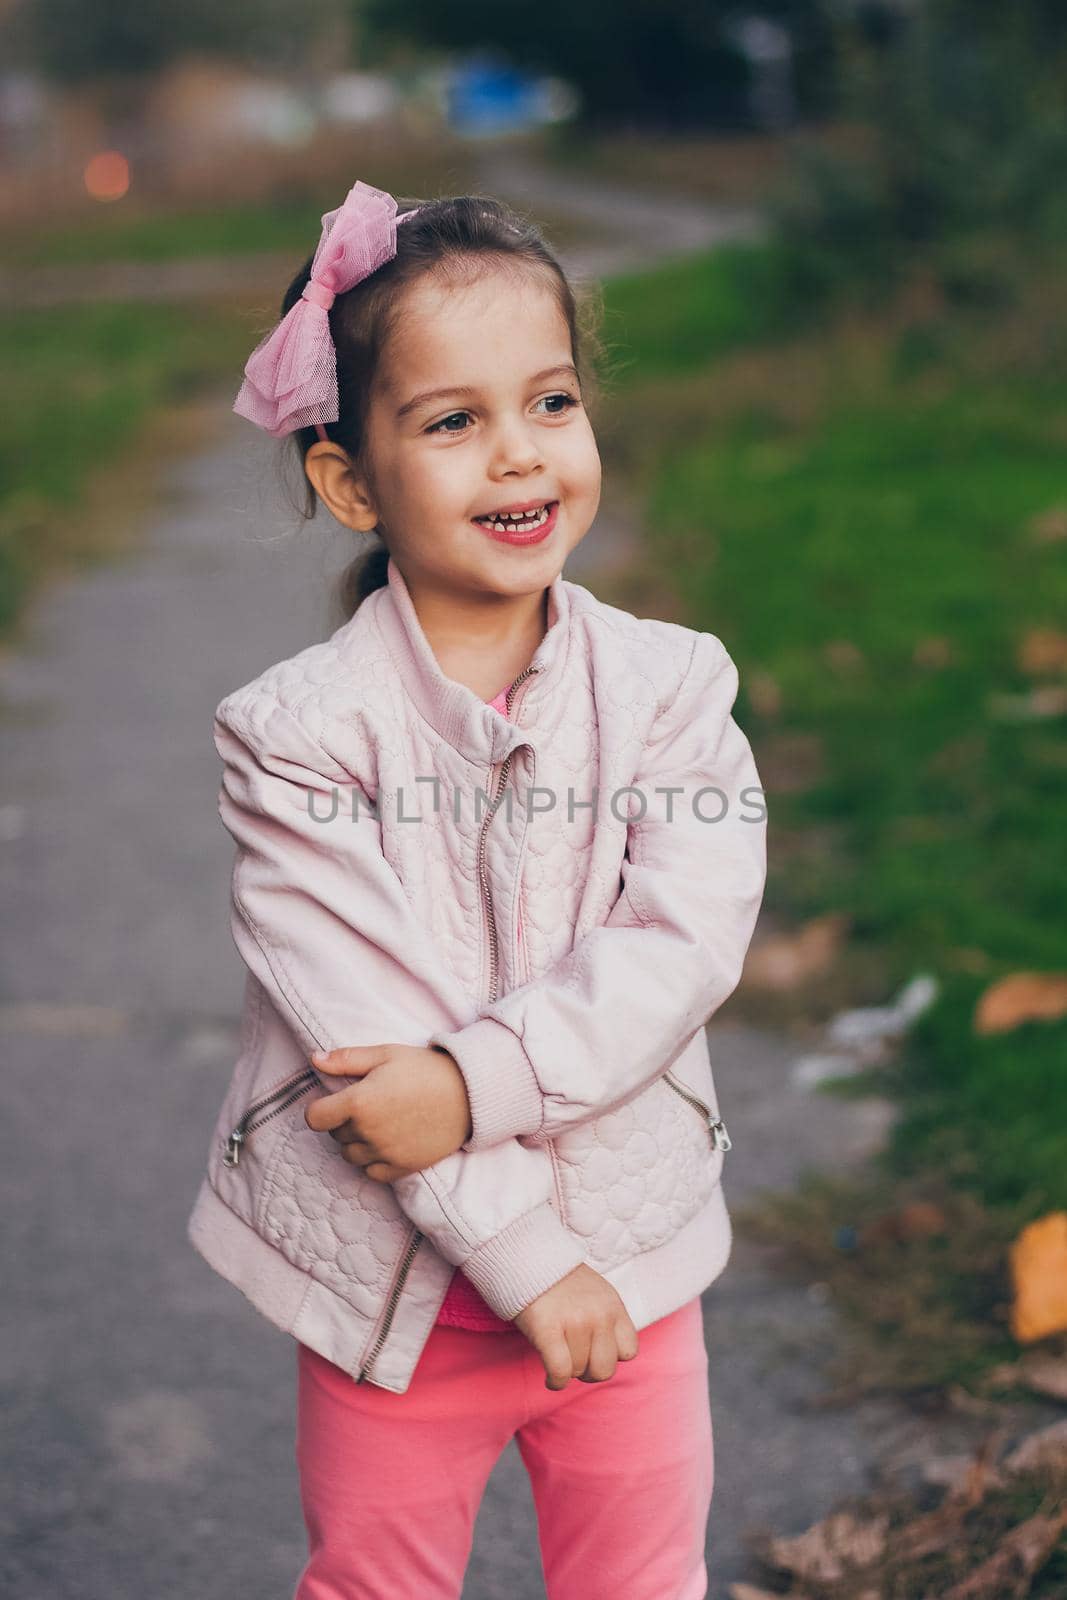 Young smiling girl in a pink jacket and pink leggings in the park